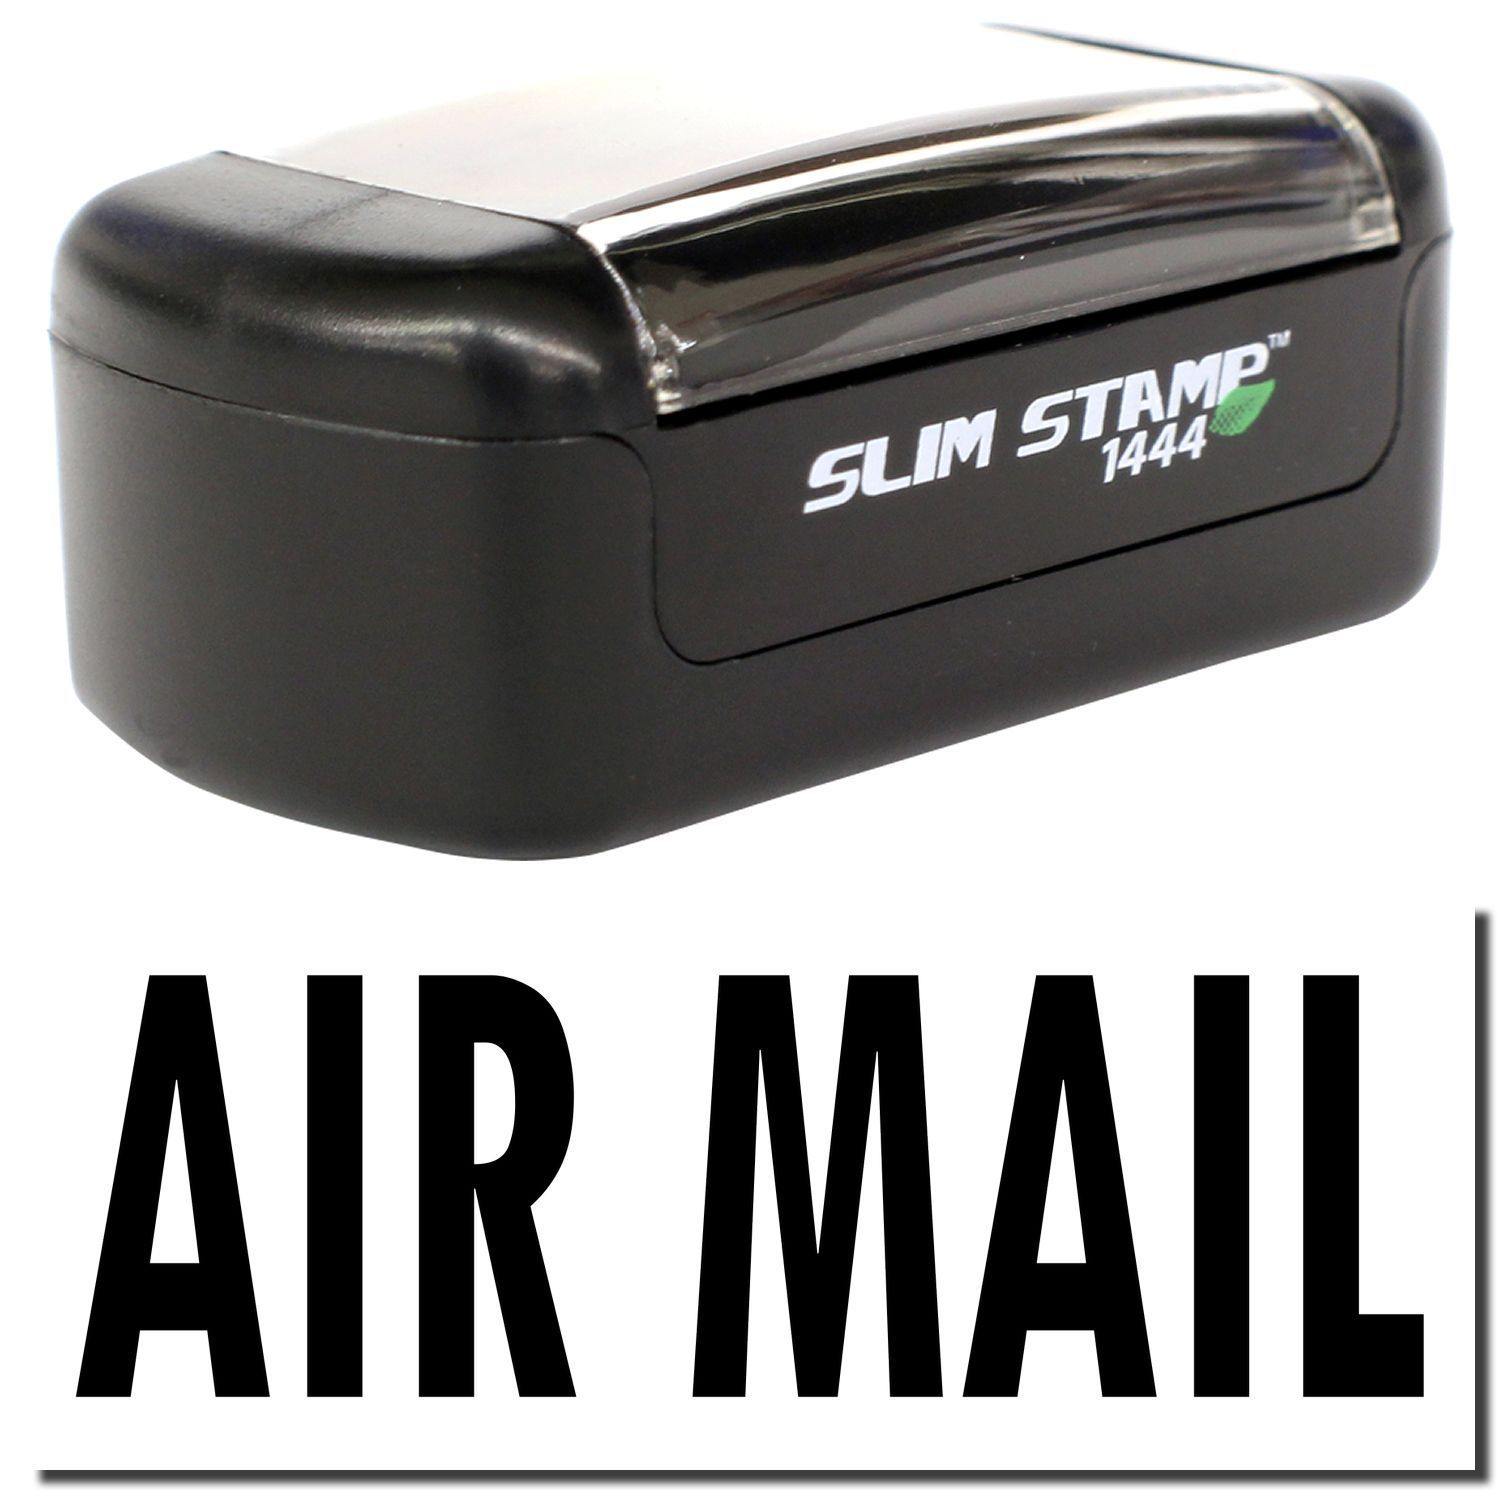 A stock office pre-inked stamp with a stamped image showing how the text "AIR MAIL" is displayed after stamping.